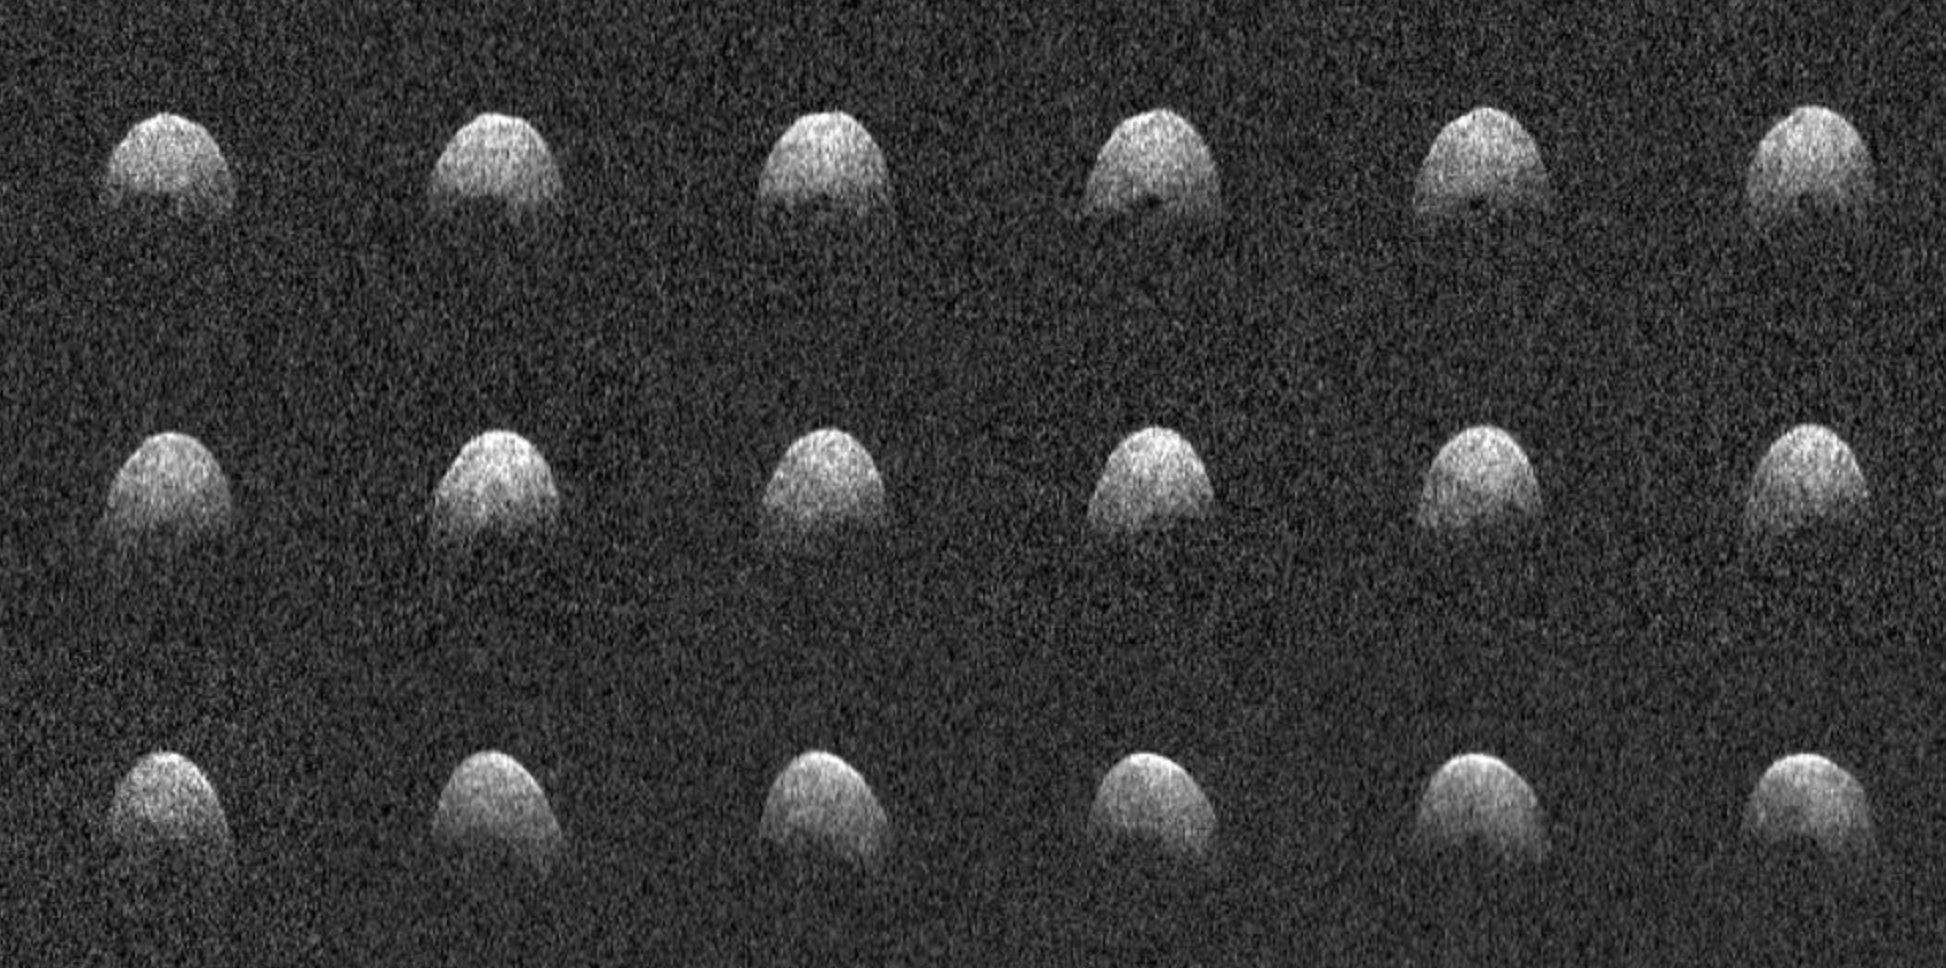 Collection of asteroid Phaethon images. Arecibo Observatory/NASA/NSF.